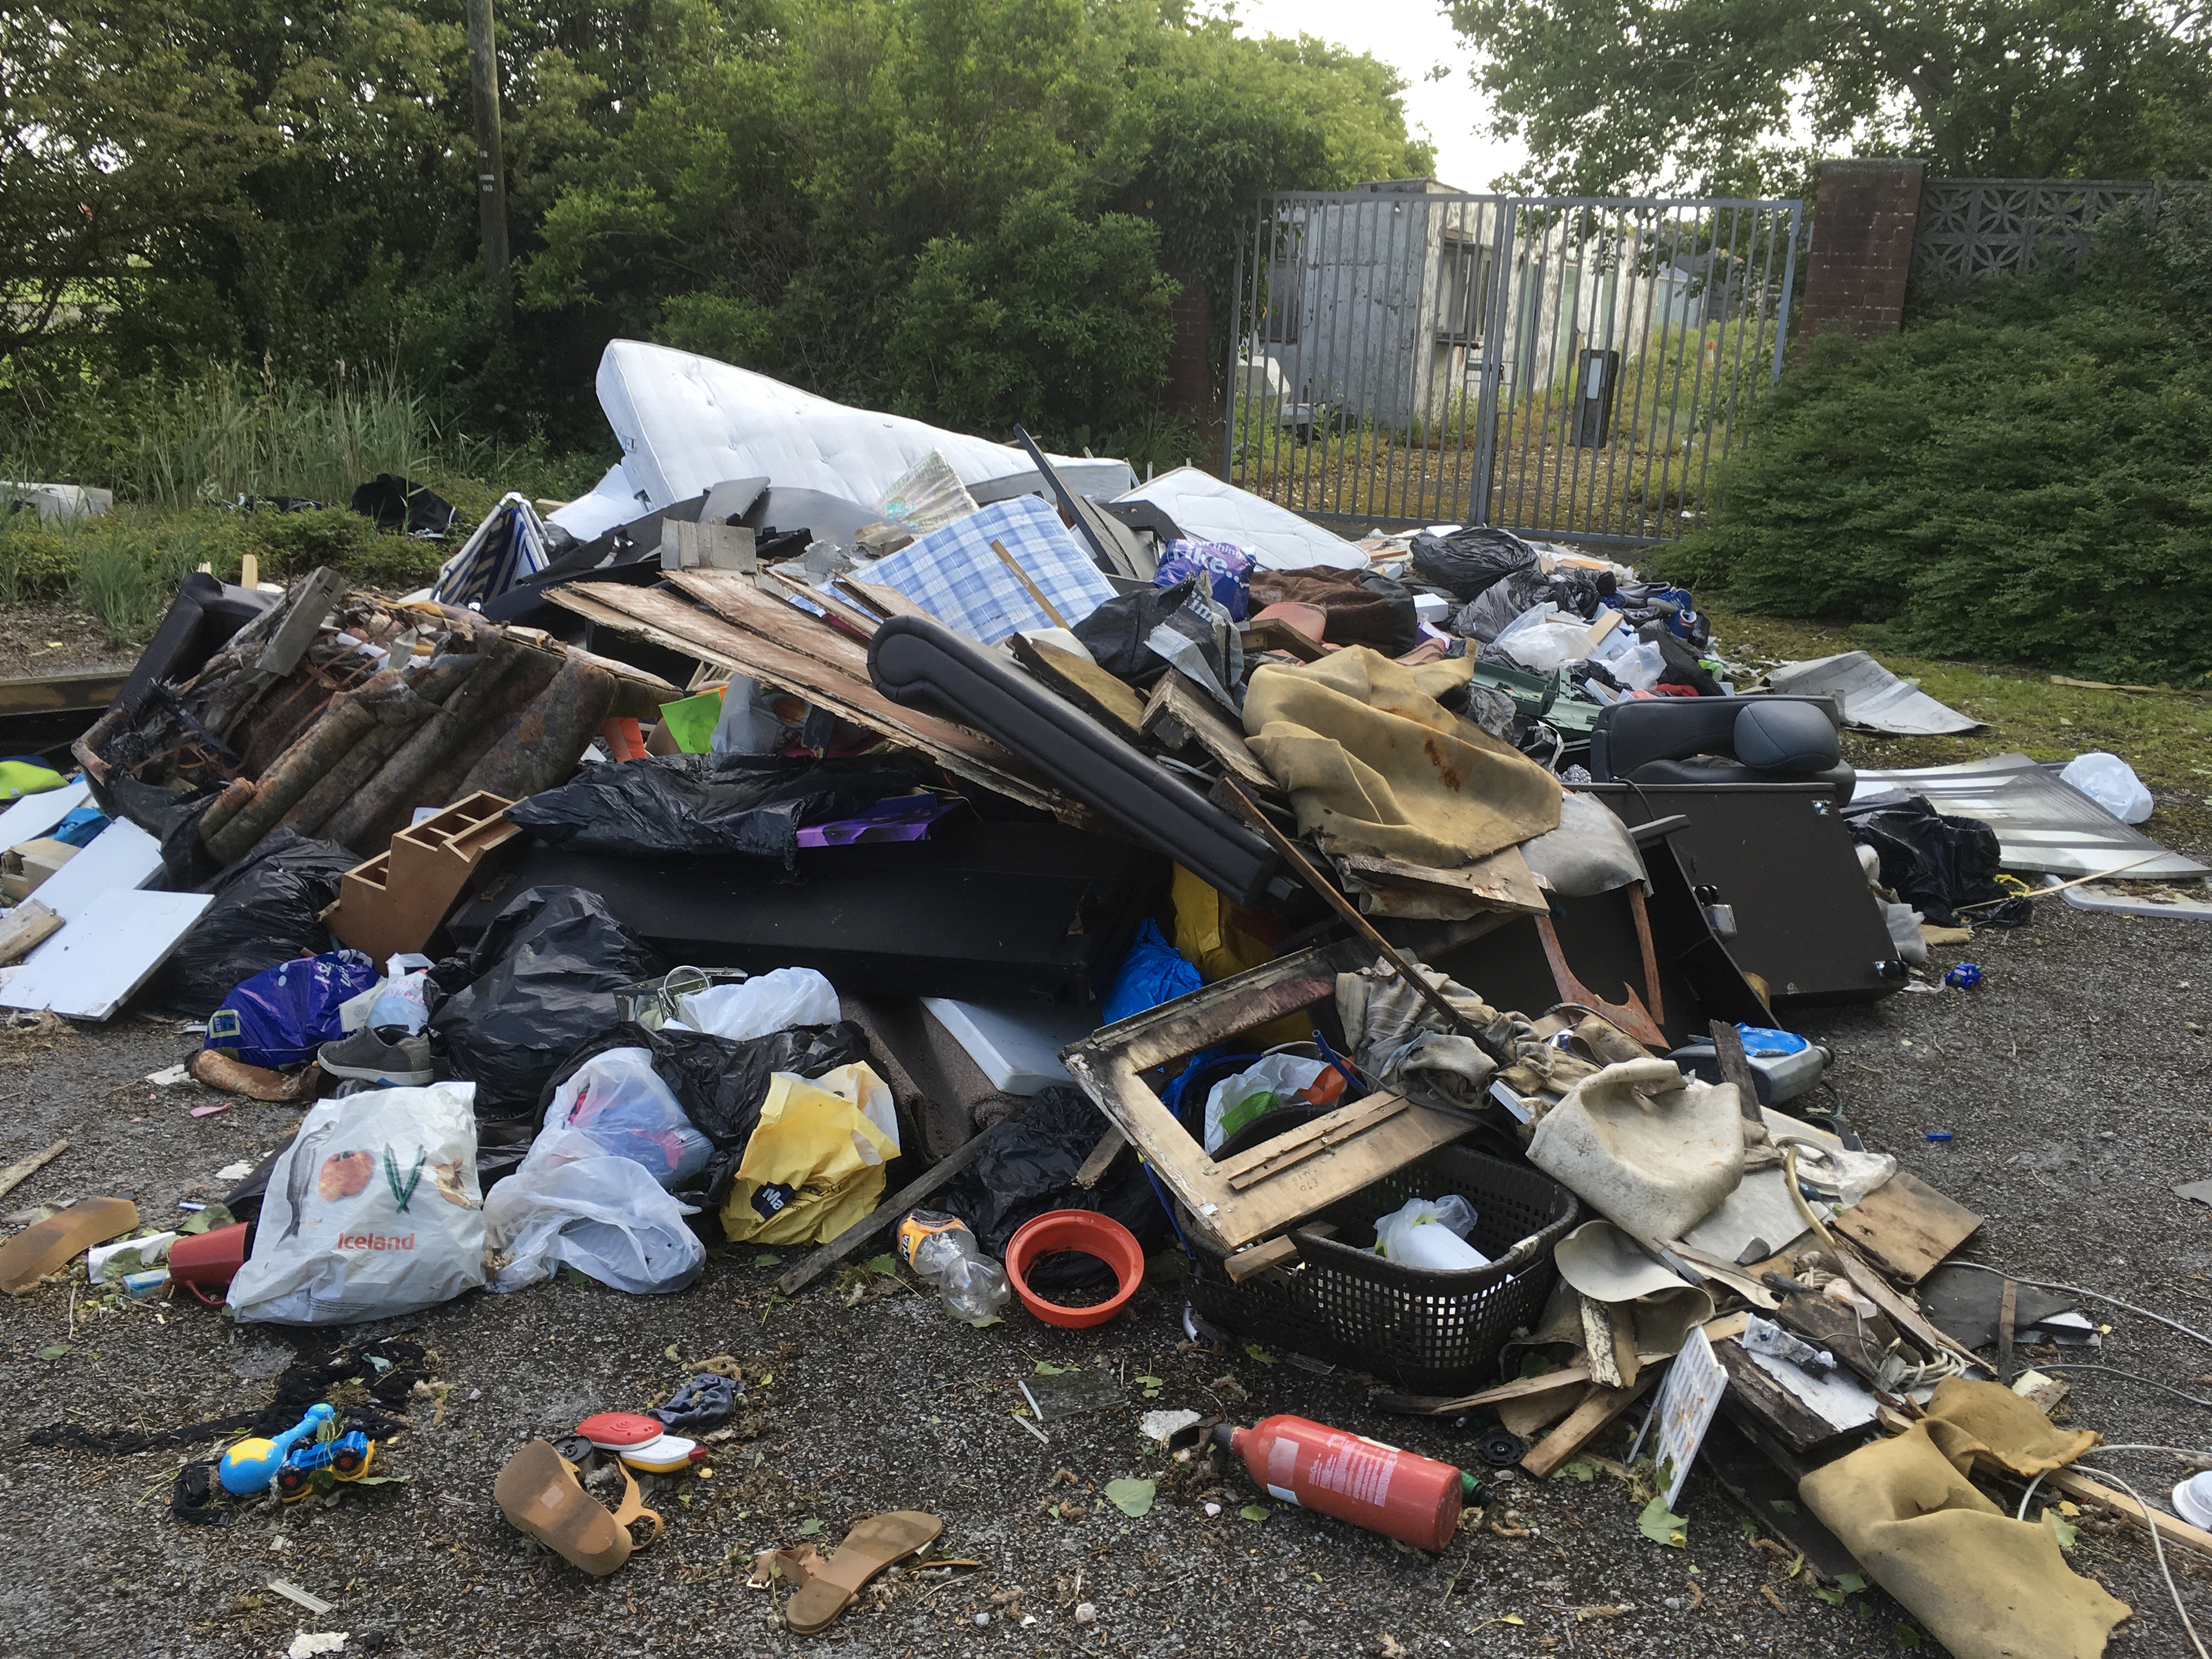 Richard James fly tipping case